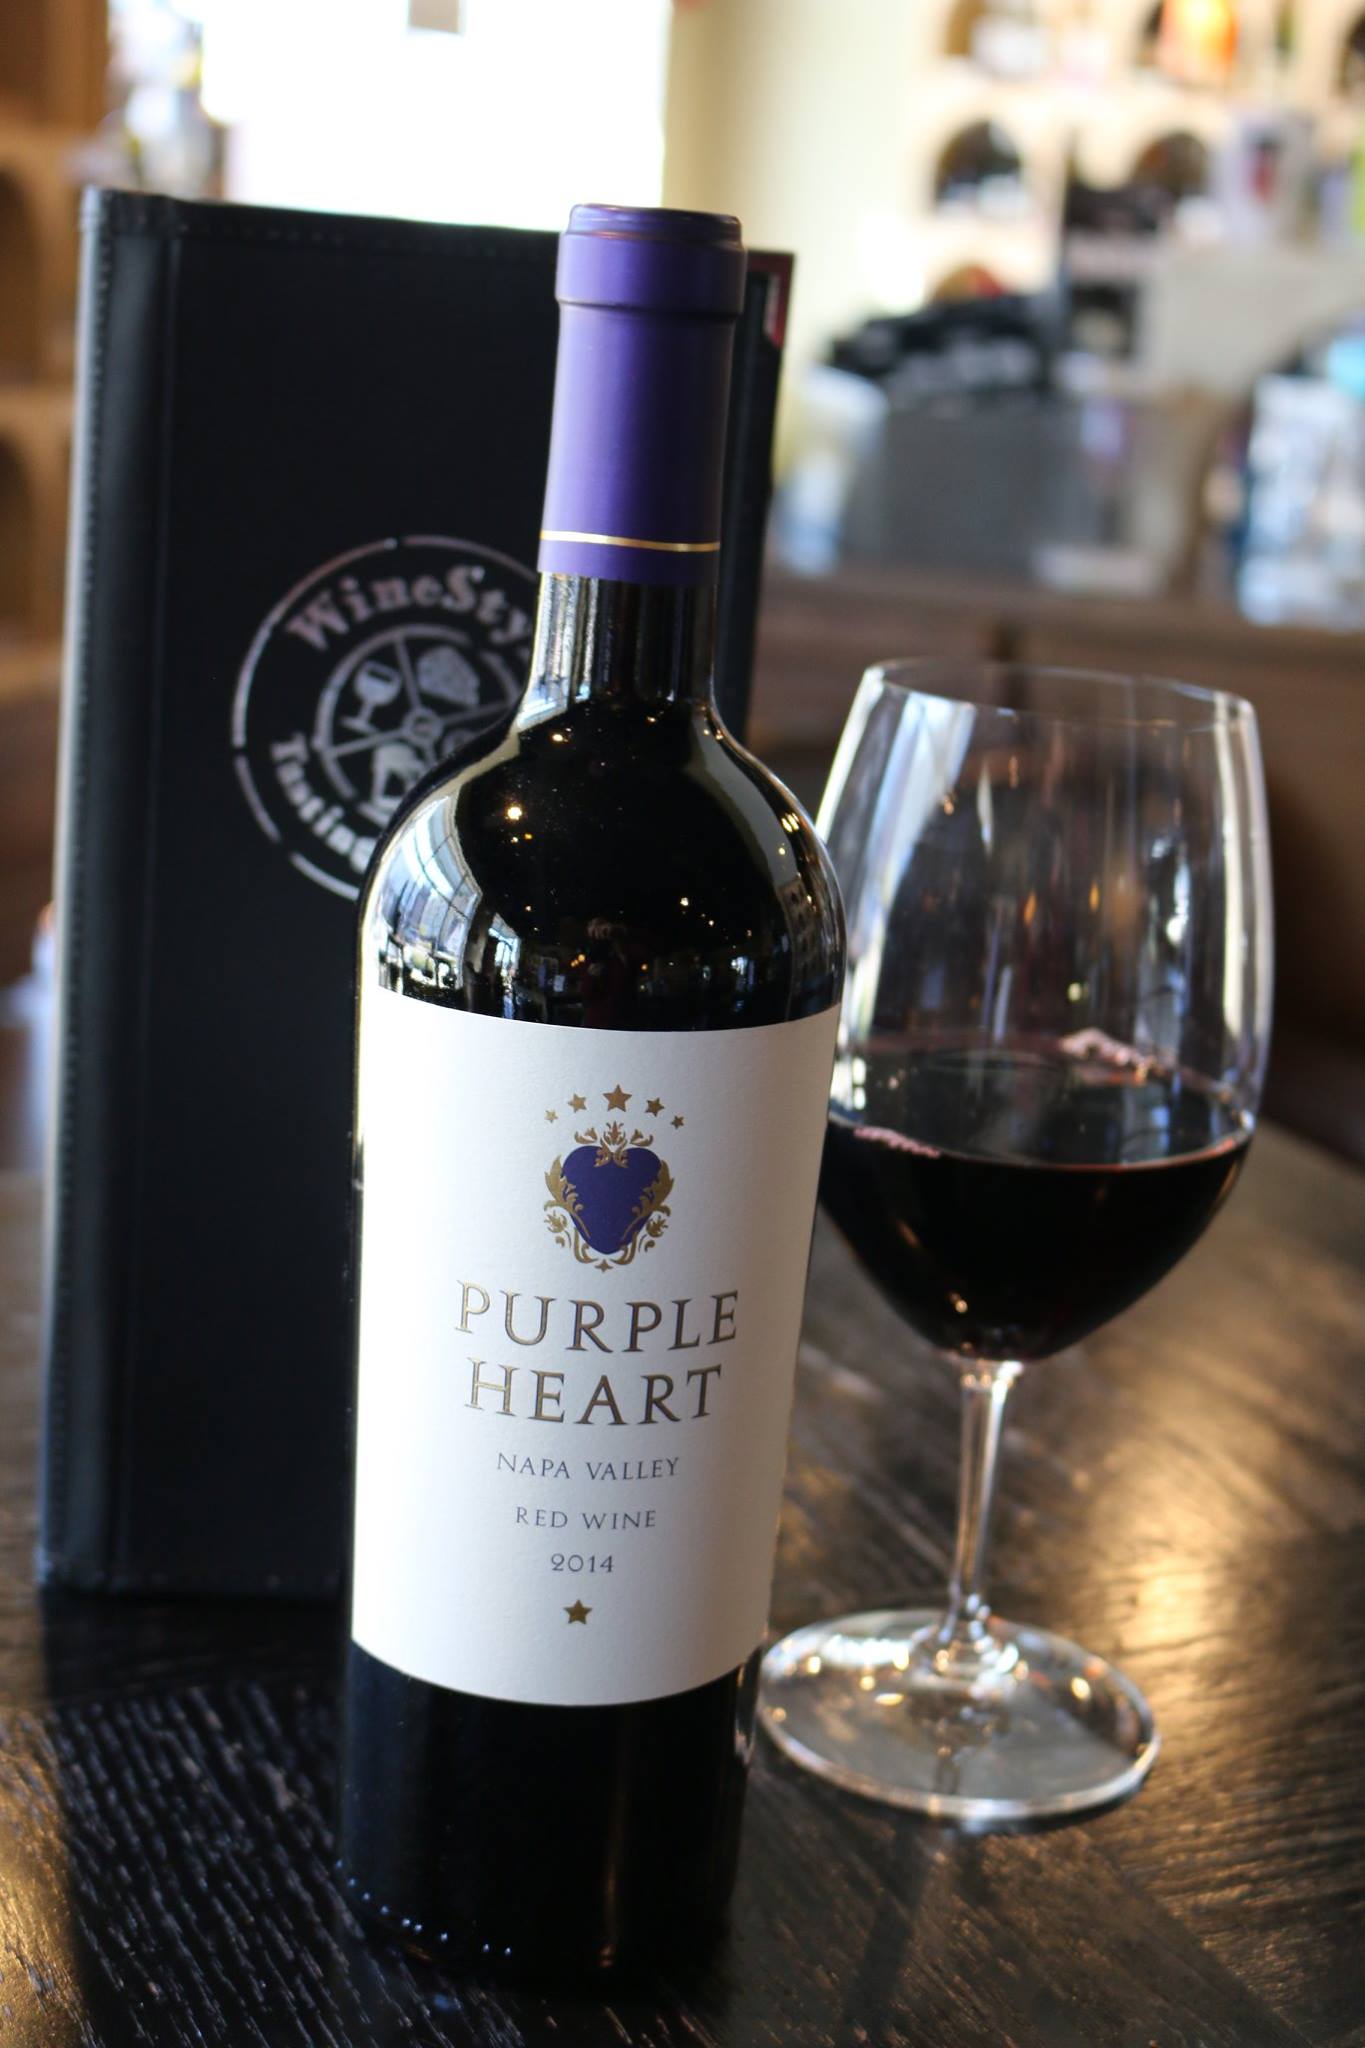 $1.00 donated for every glass poured of Purple Heart wine